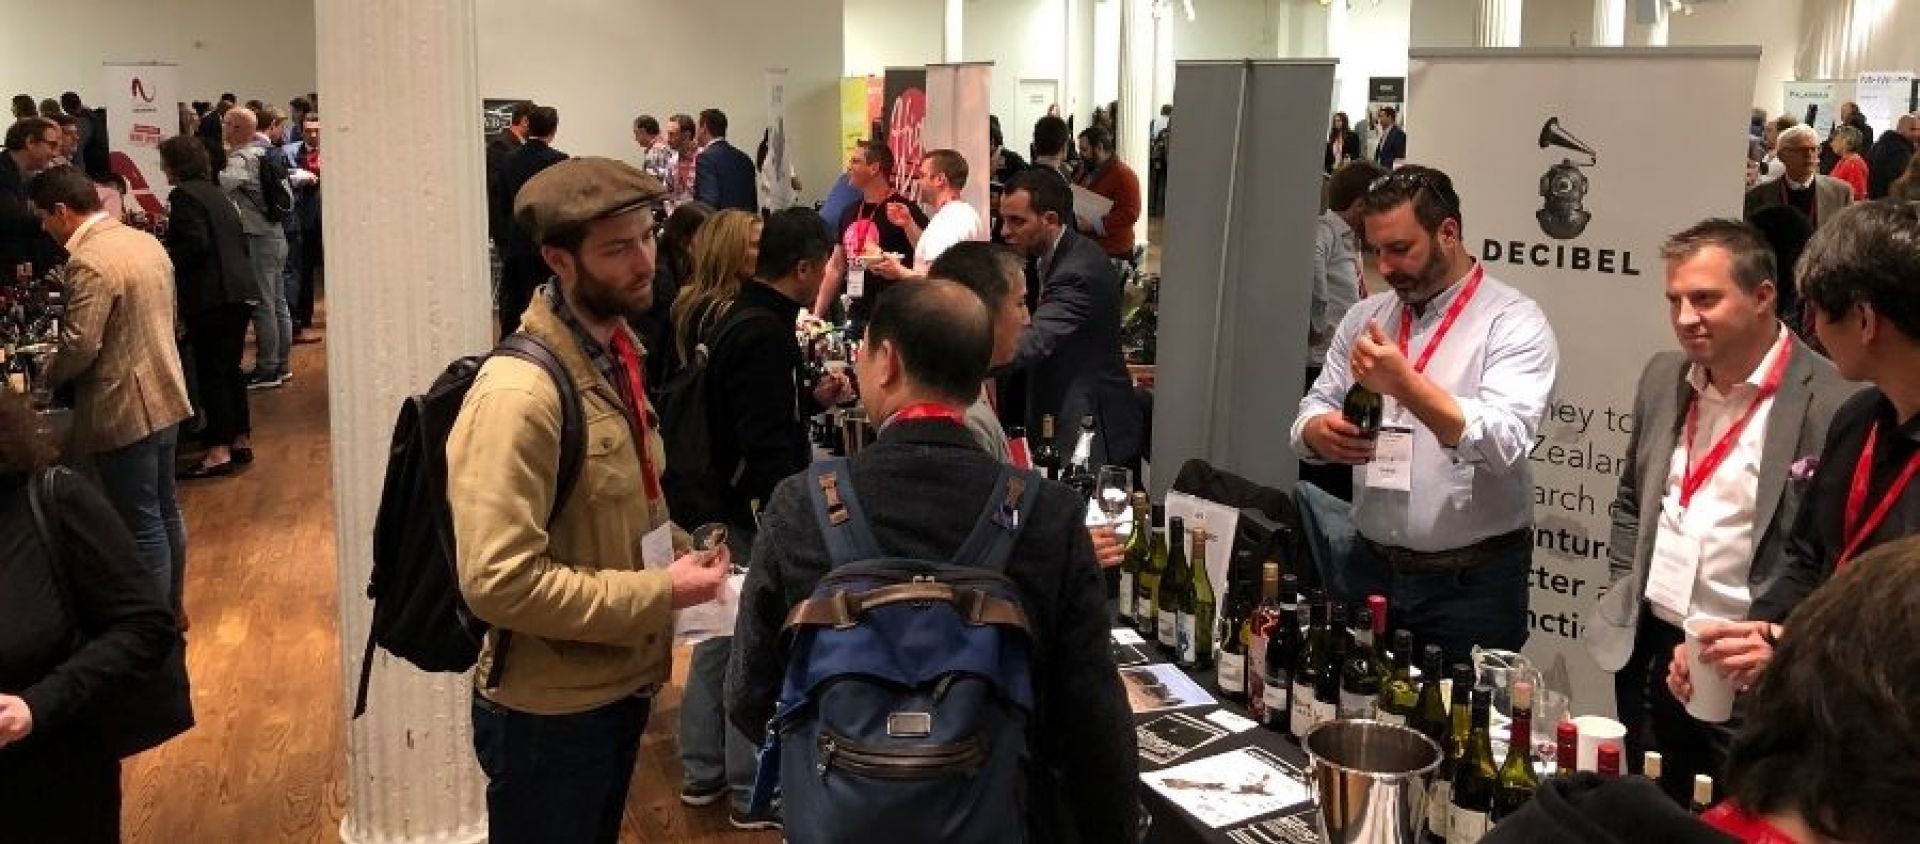 Photo for: The USA Trade Tasting (USATT) Show is coming back to Chi-town!